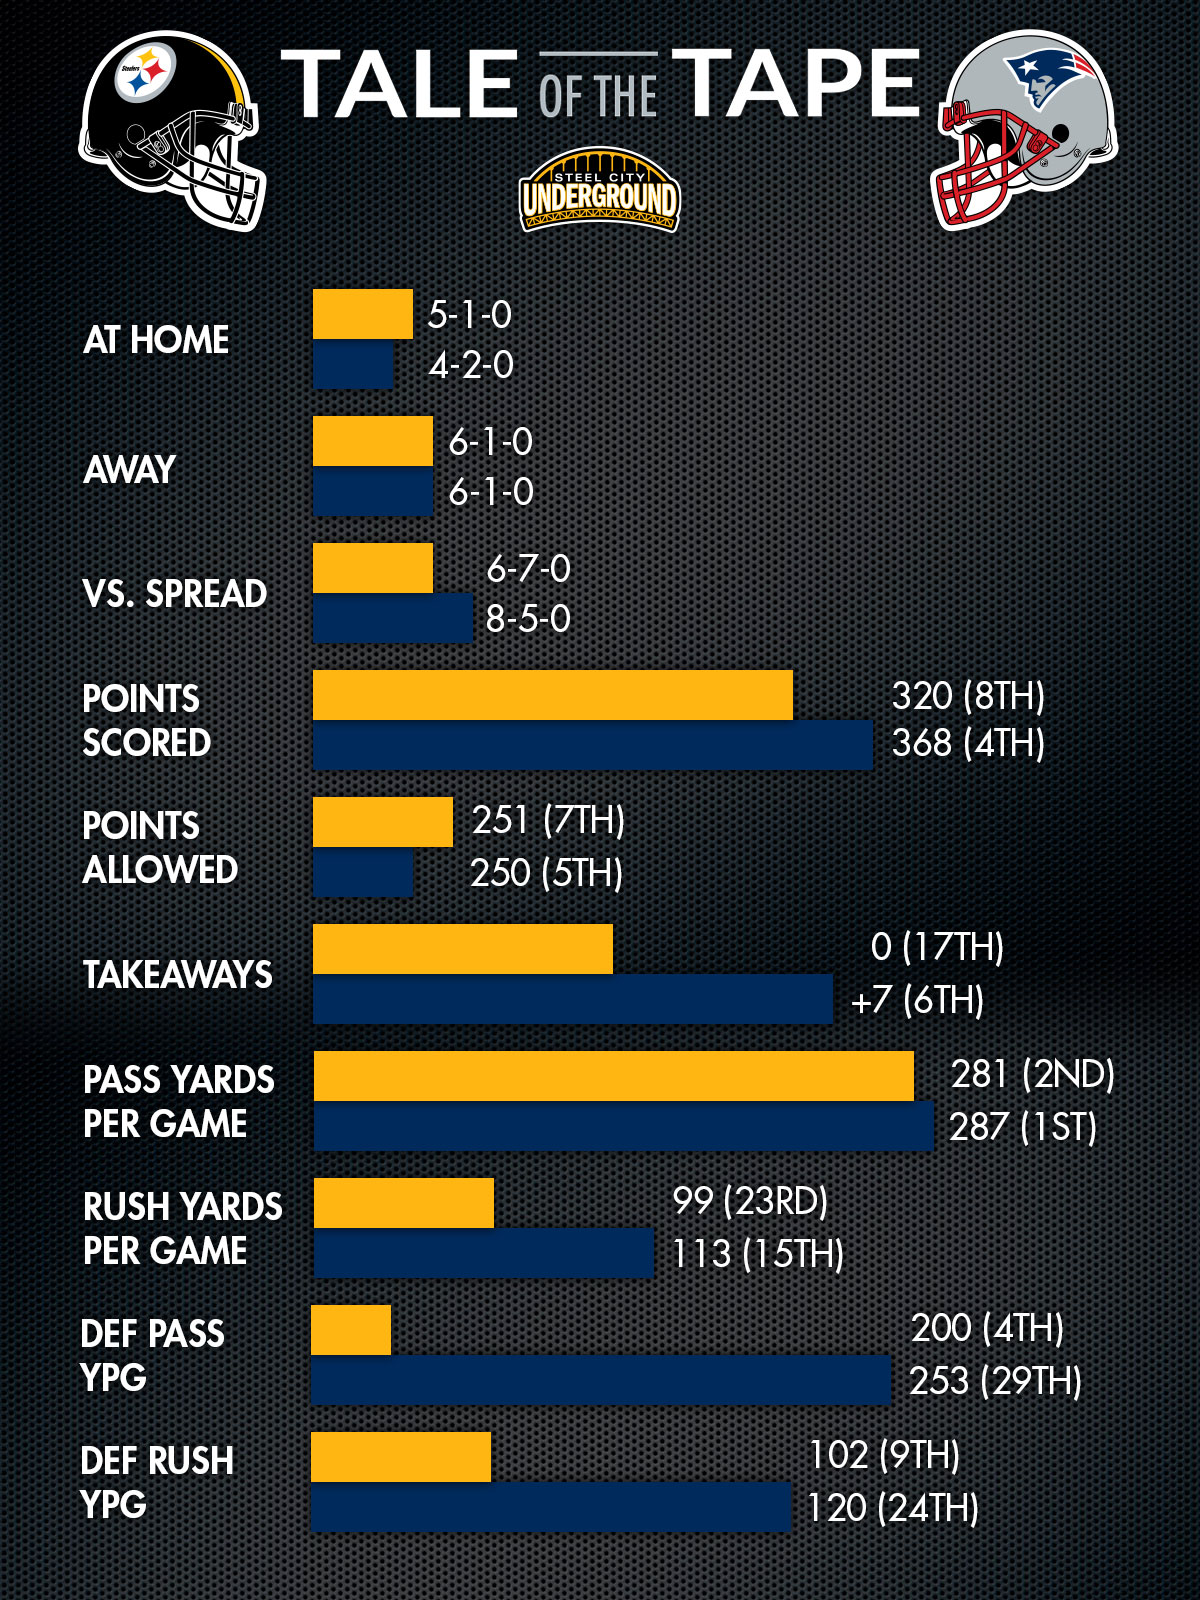 Steelers Patriots Tale of the Tape